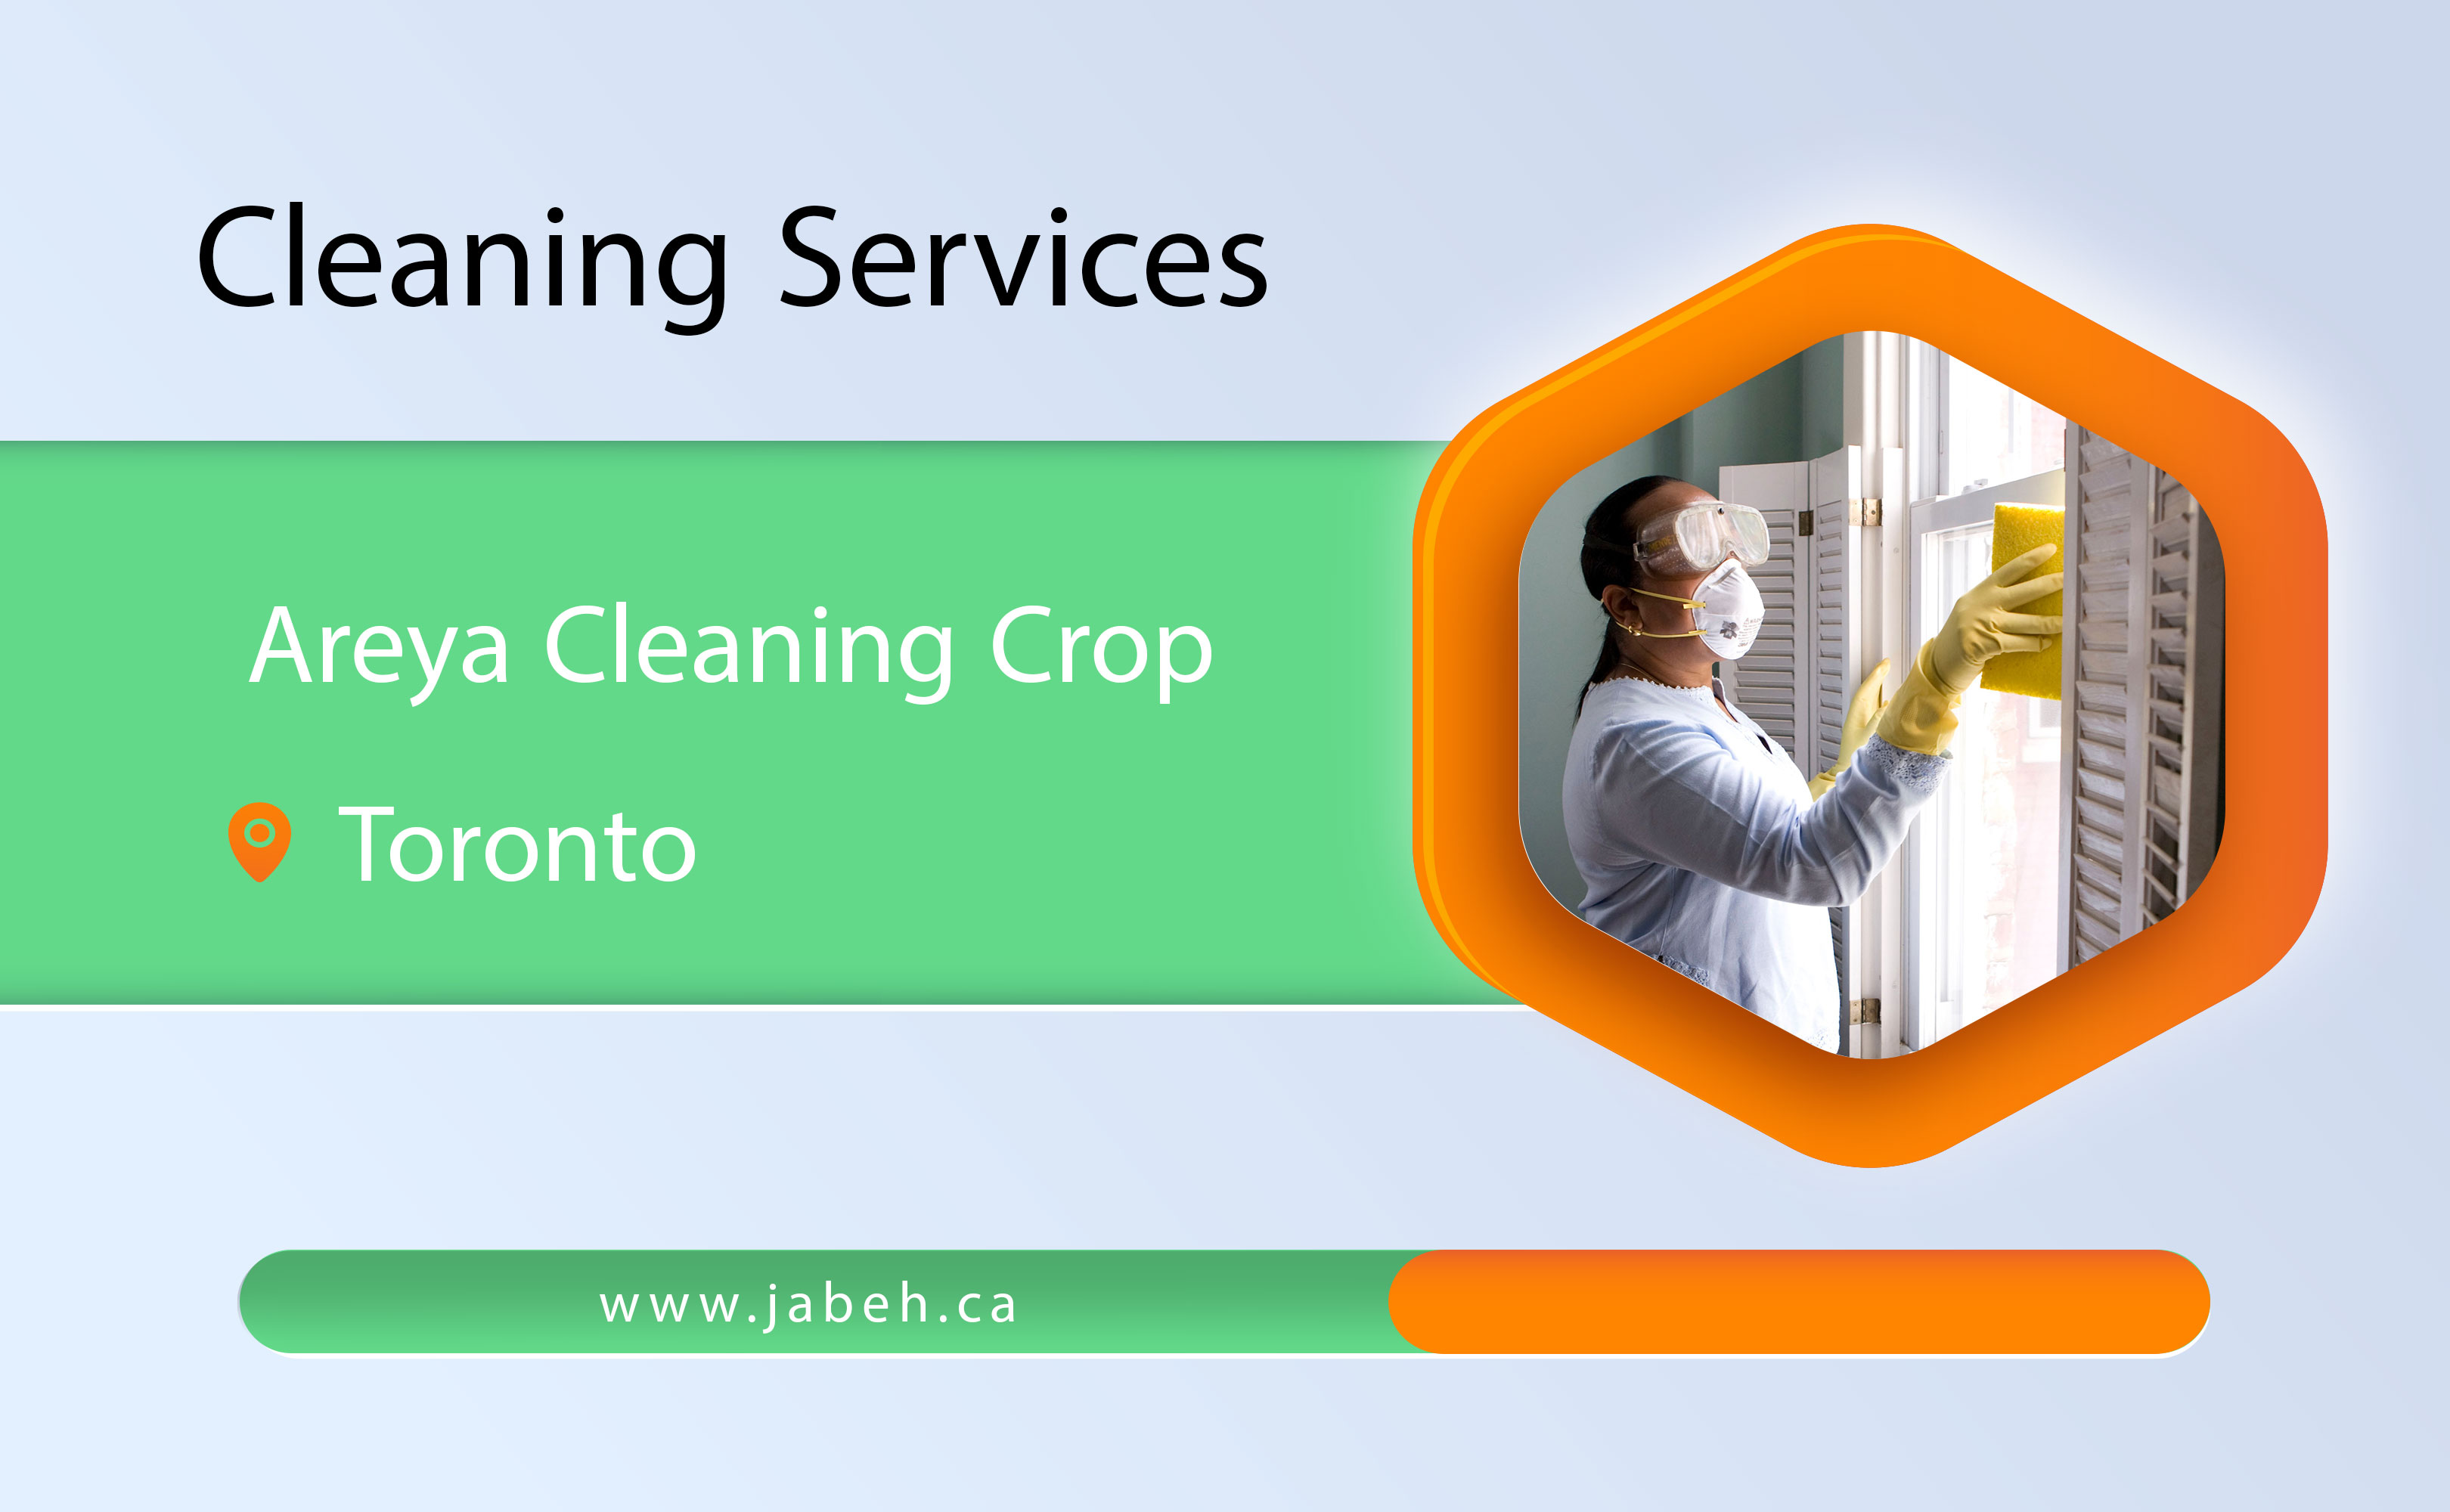 Areya cleaning crop cleaning services in Toronto